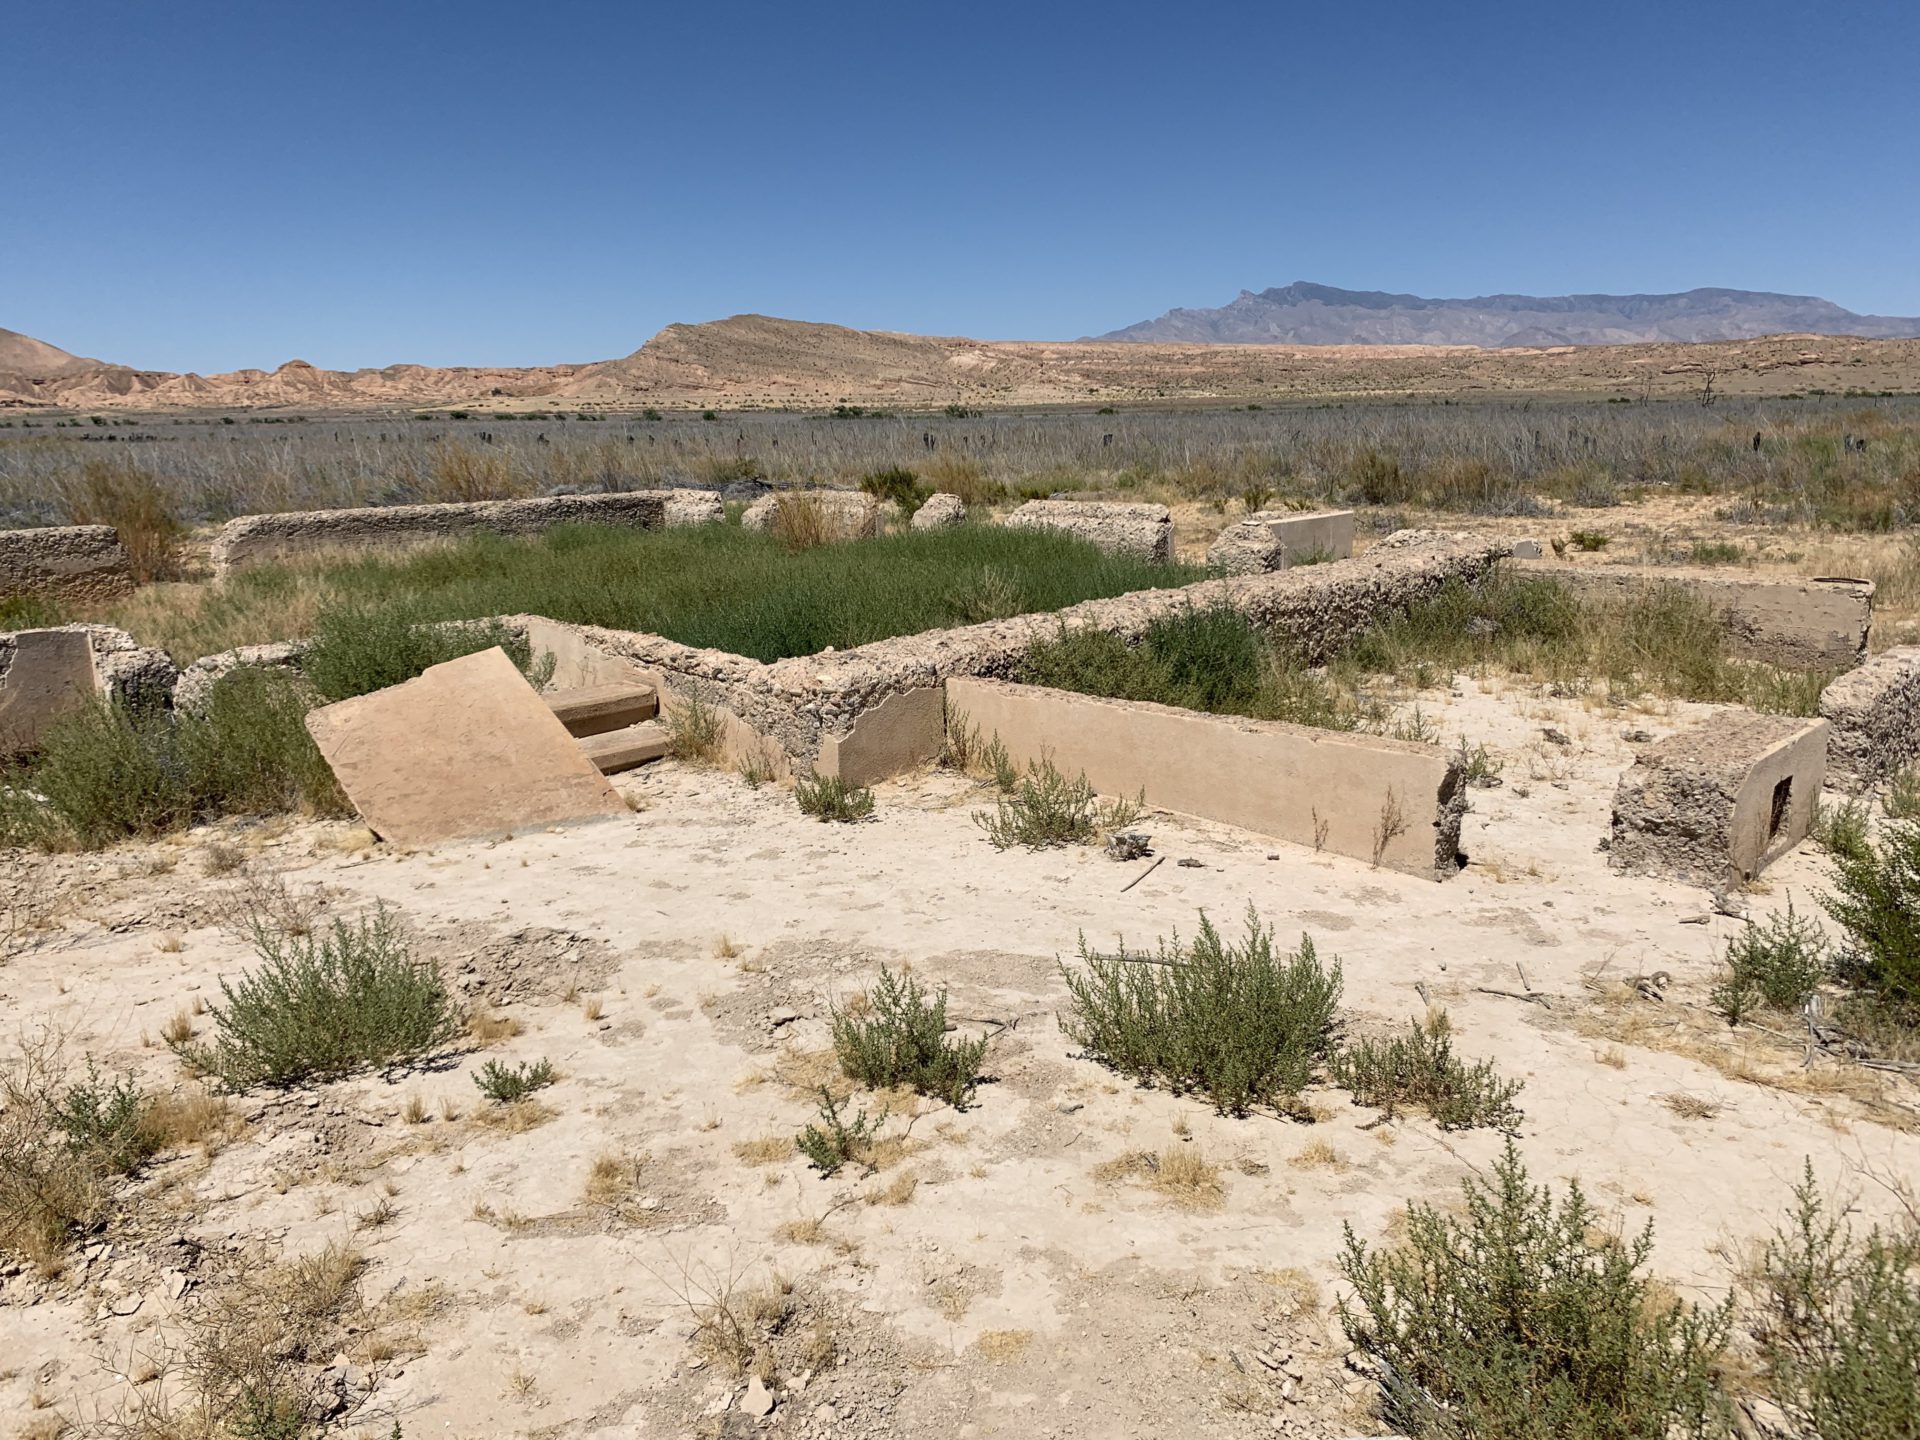 The St. Thomas ghost town in Las Vegas offers a sight of broken pieces of the abandoned buildings buried in the desert landscape